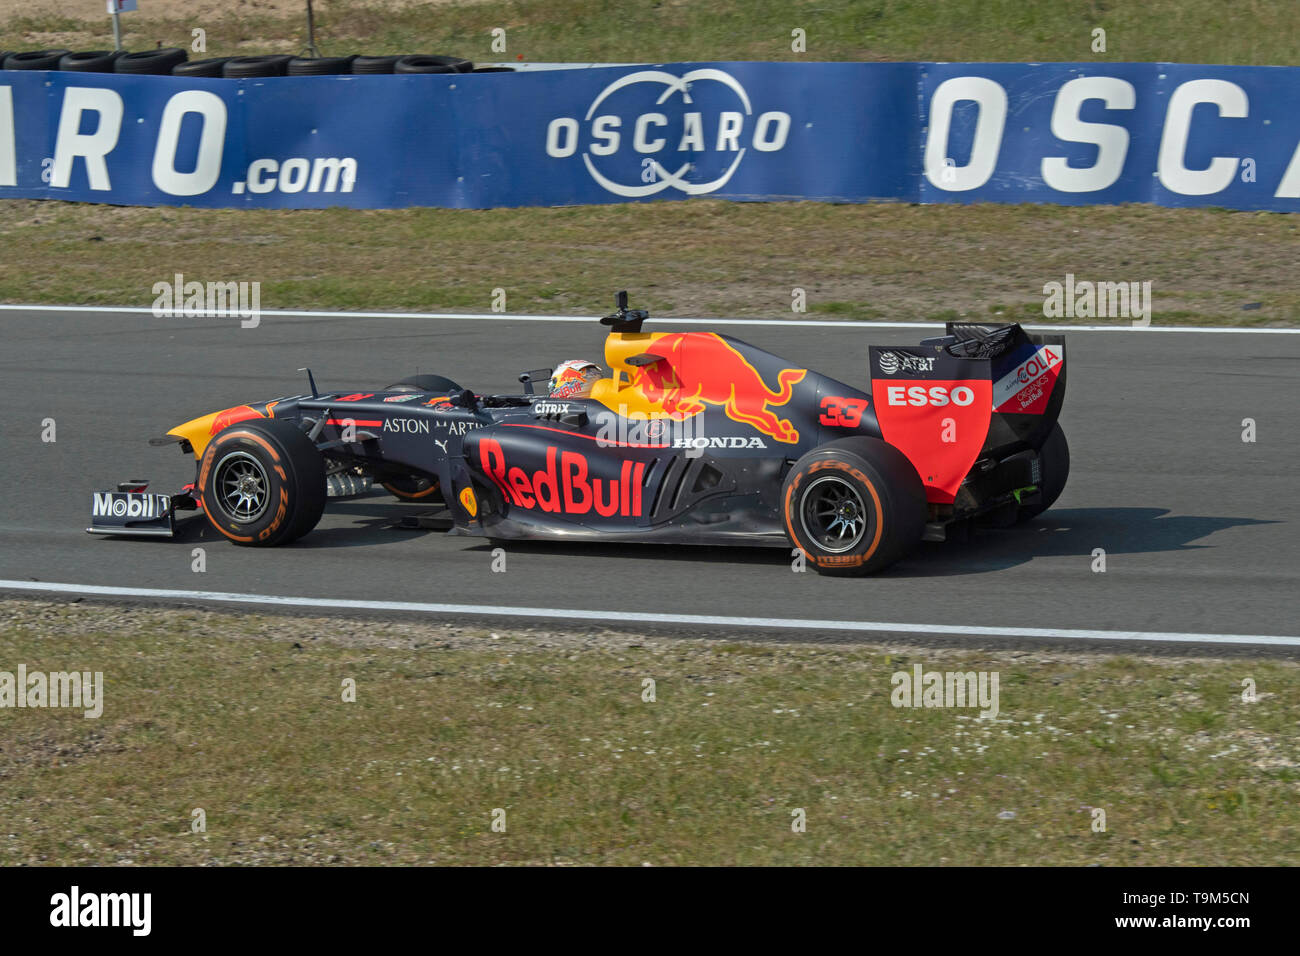 Max verstrappen formule 1 coureur in his red bull rb 7 from 2011 Stock Photo